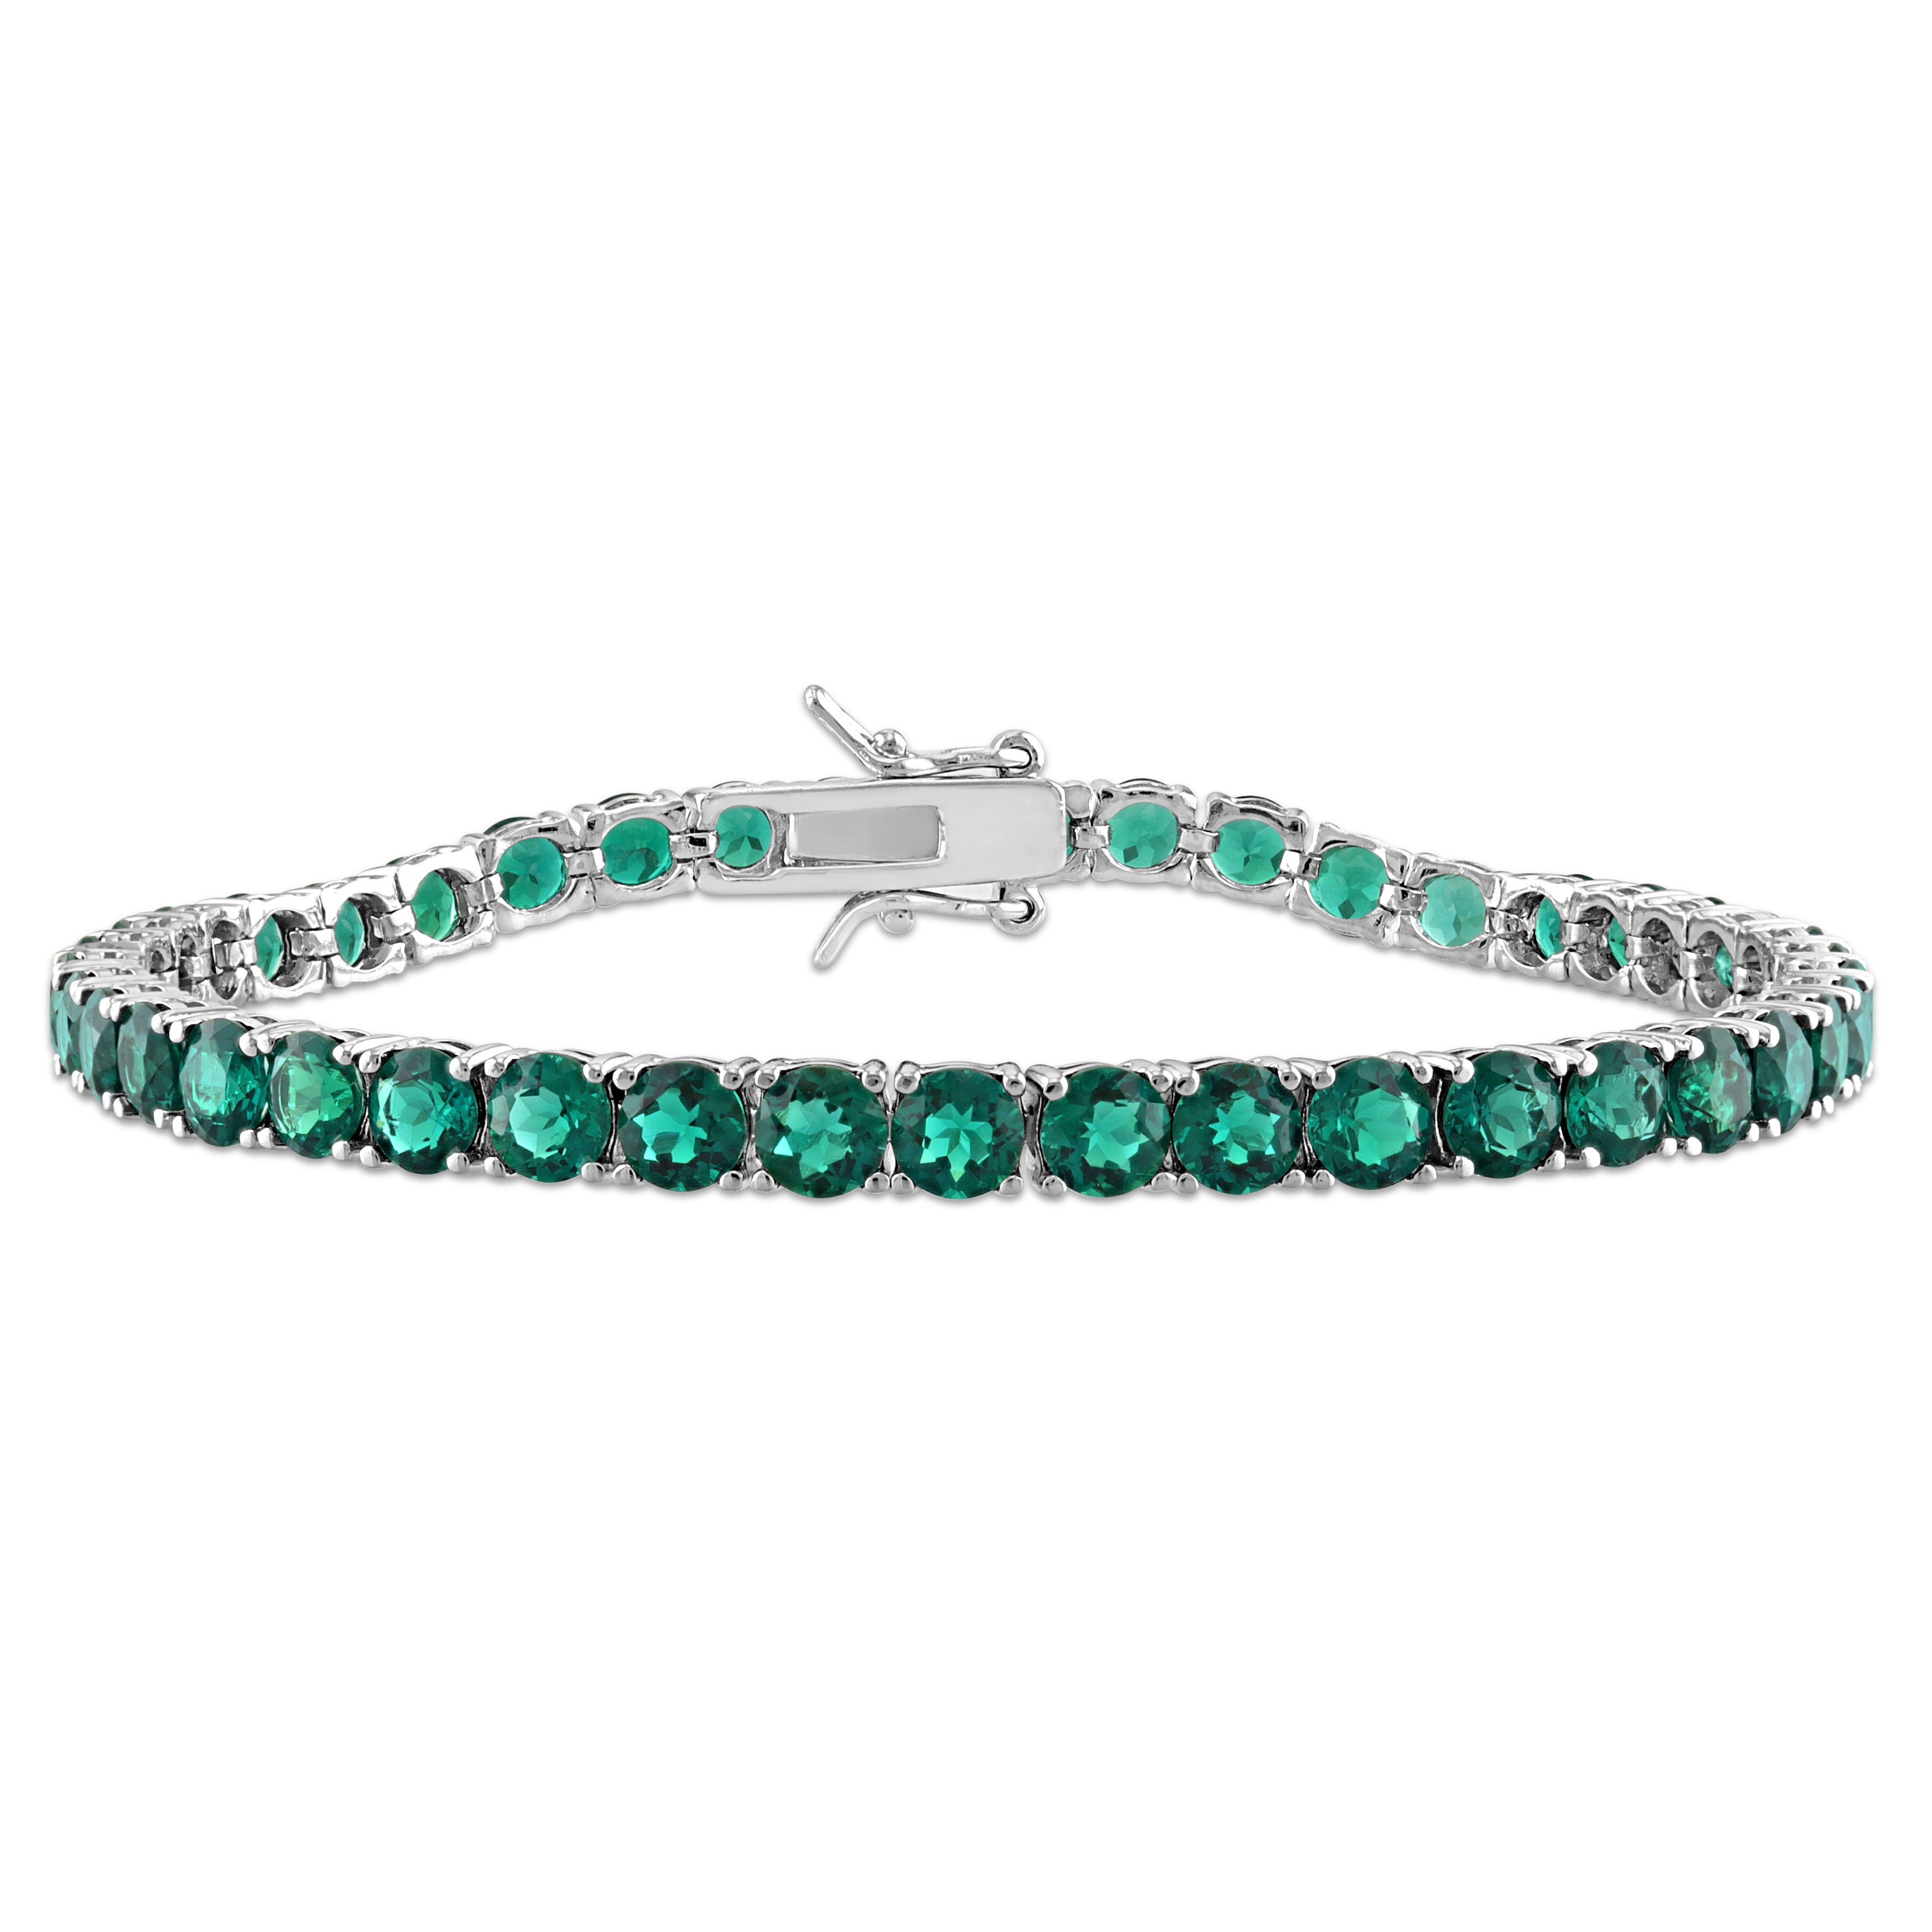 10 1/2 CT TGW Created Emerald Tennis Bracelet with Sterling Silver Clasp - 7.25 in.